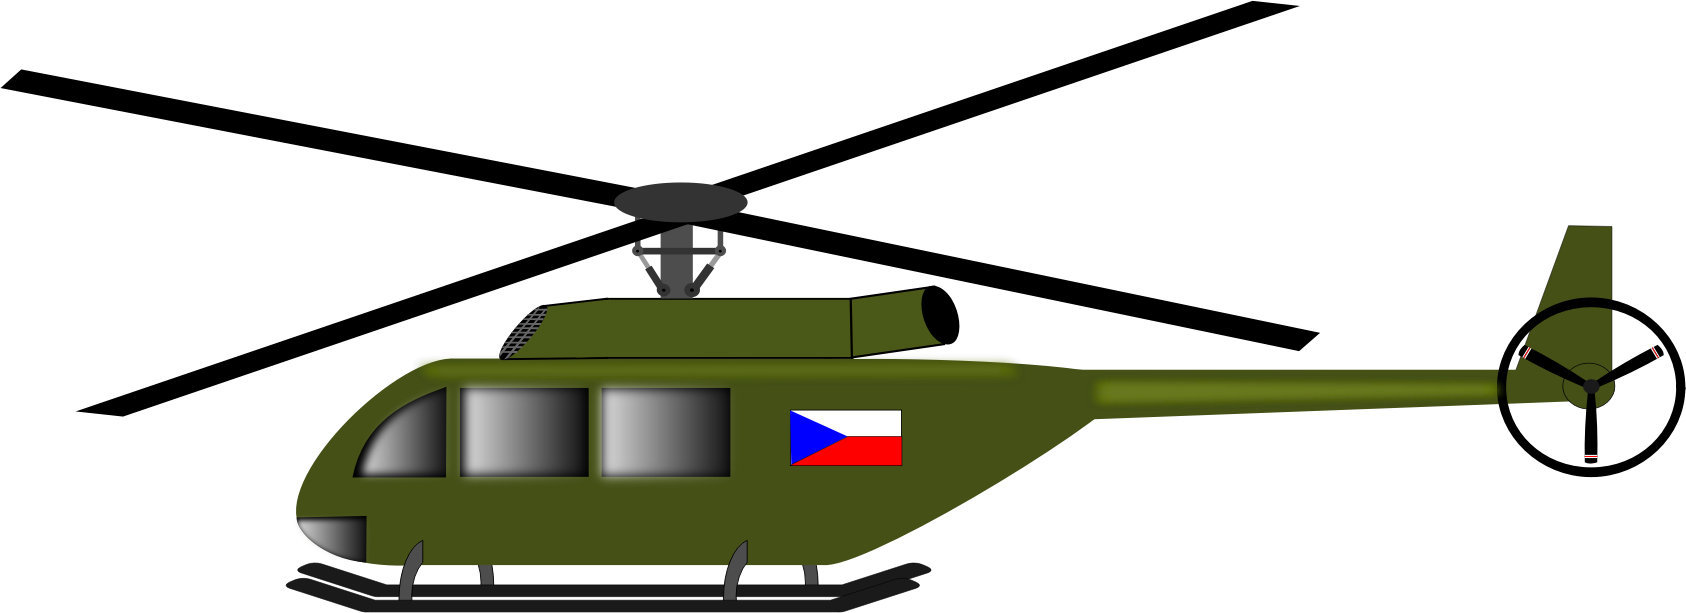 Clipart helicopter 